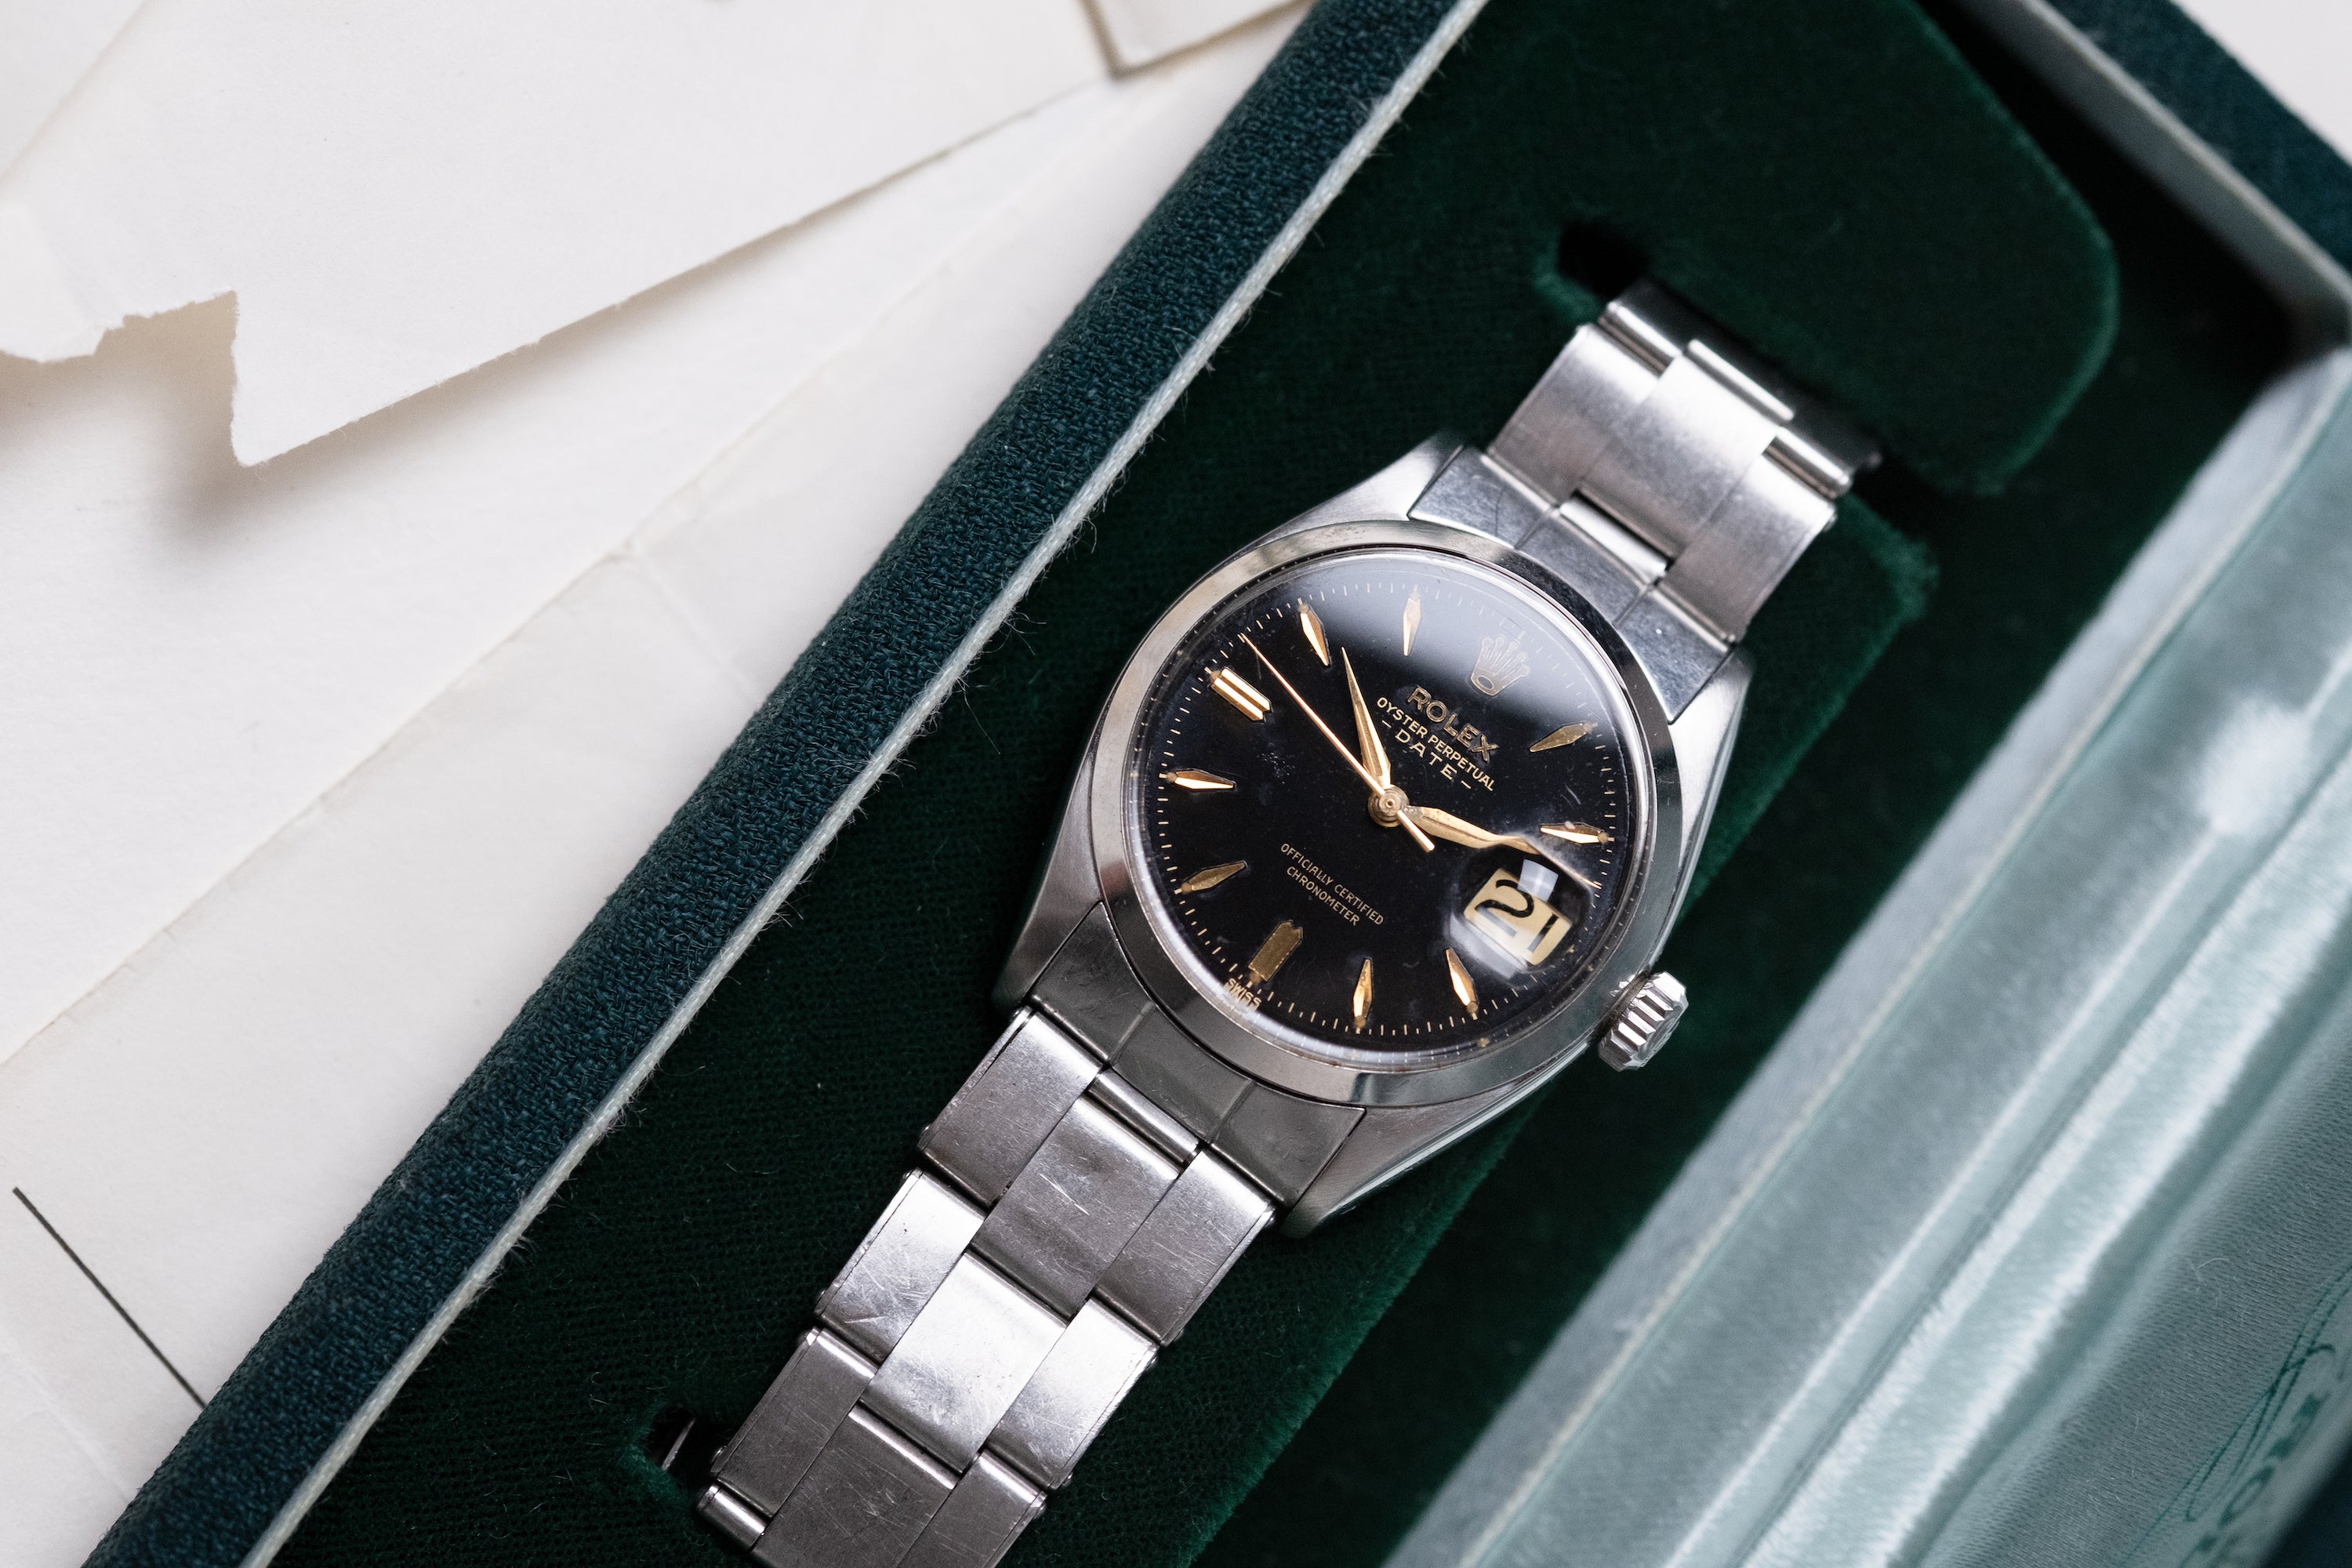 ROLEX Oyster Perpetual Date Gilt Dial Ref. 6534 Boxes and Service Papers (1957)